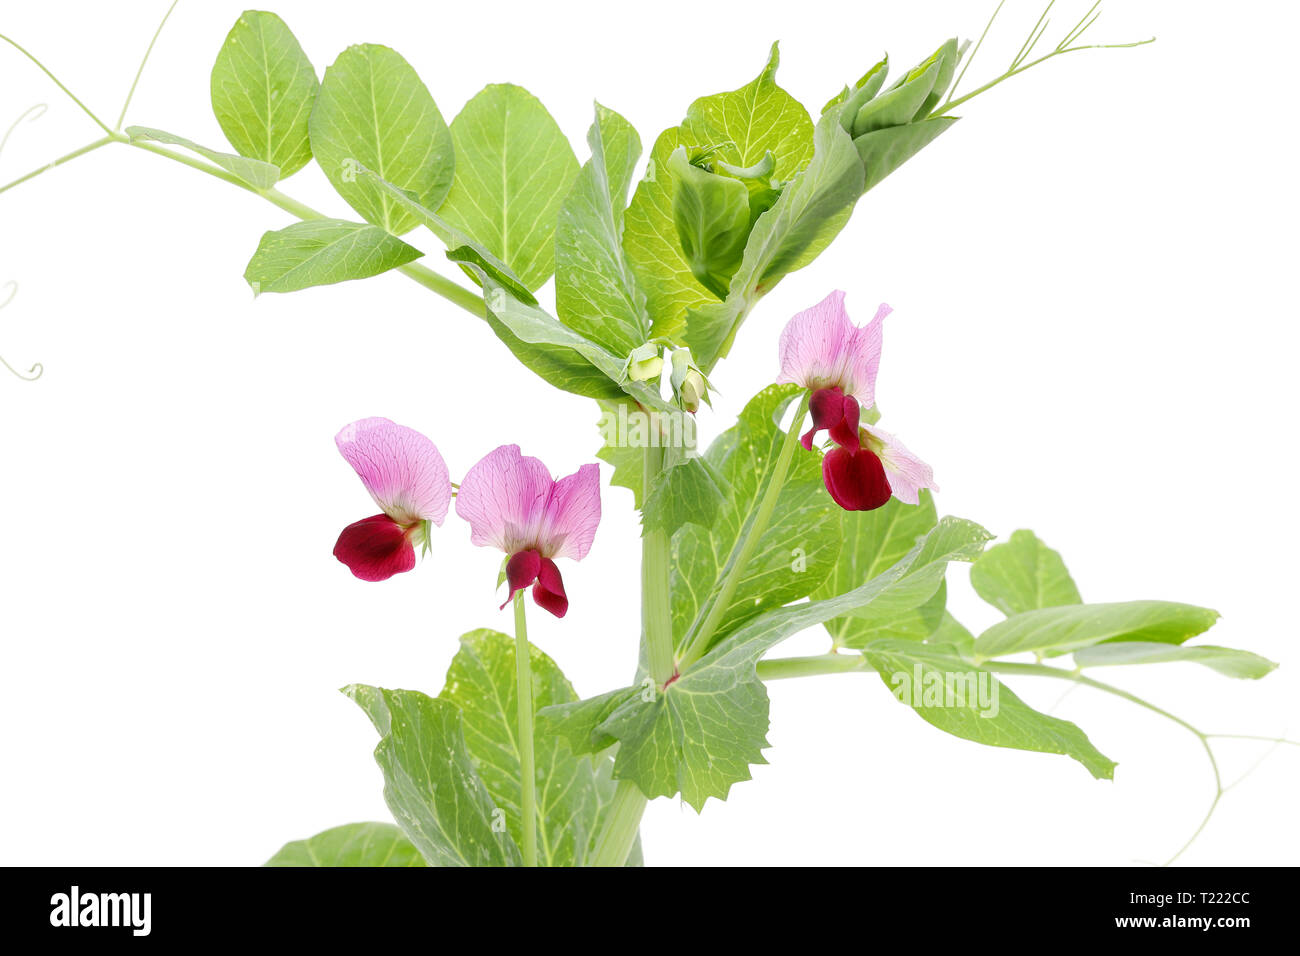 Green bean flower isolated on white background Stock Photo